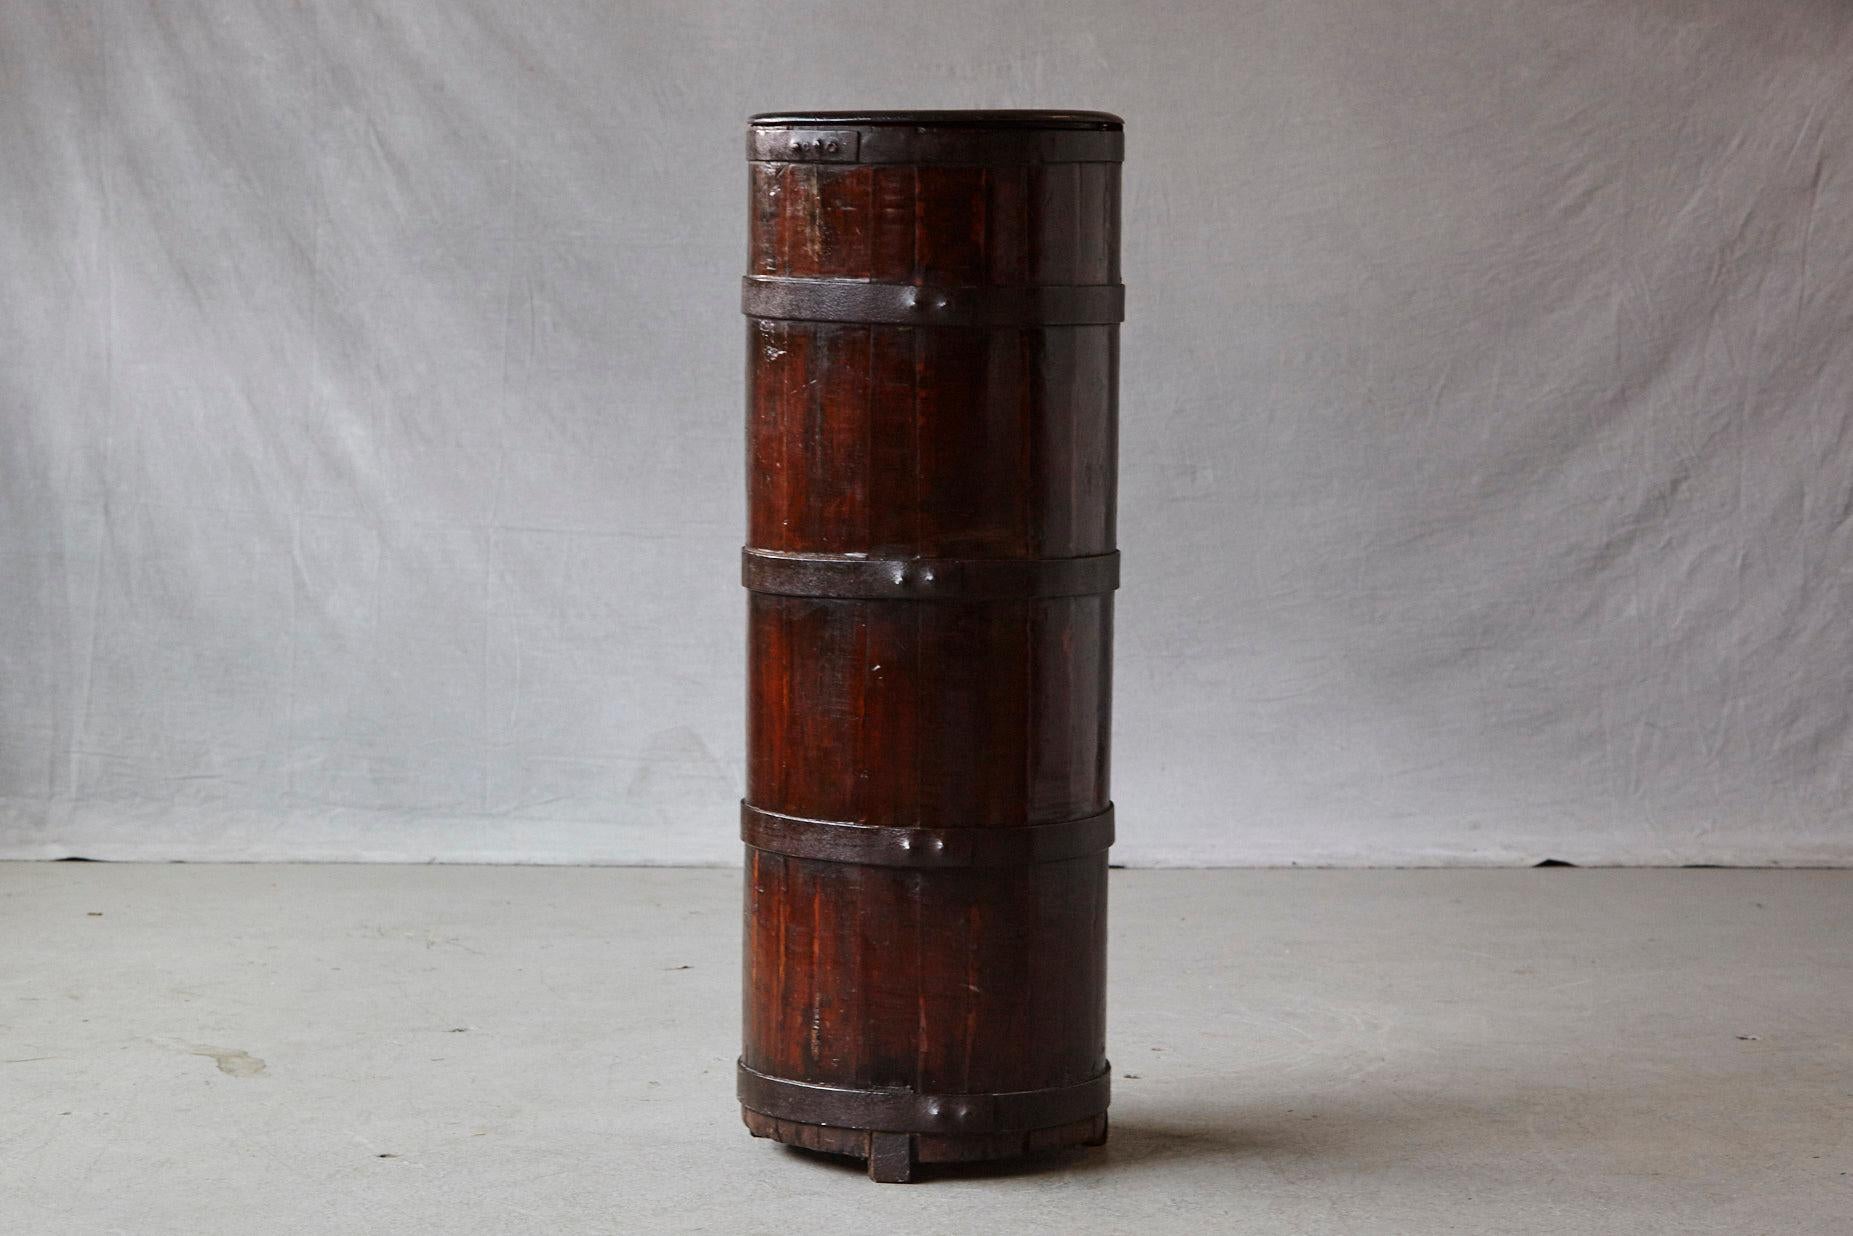 Chinese Export Late 19th Century Tall Chinese Fir Barrel from Zhejiang, circa 1870s